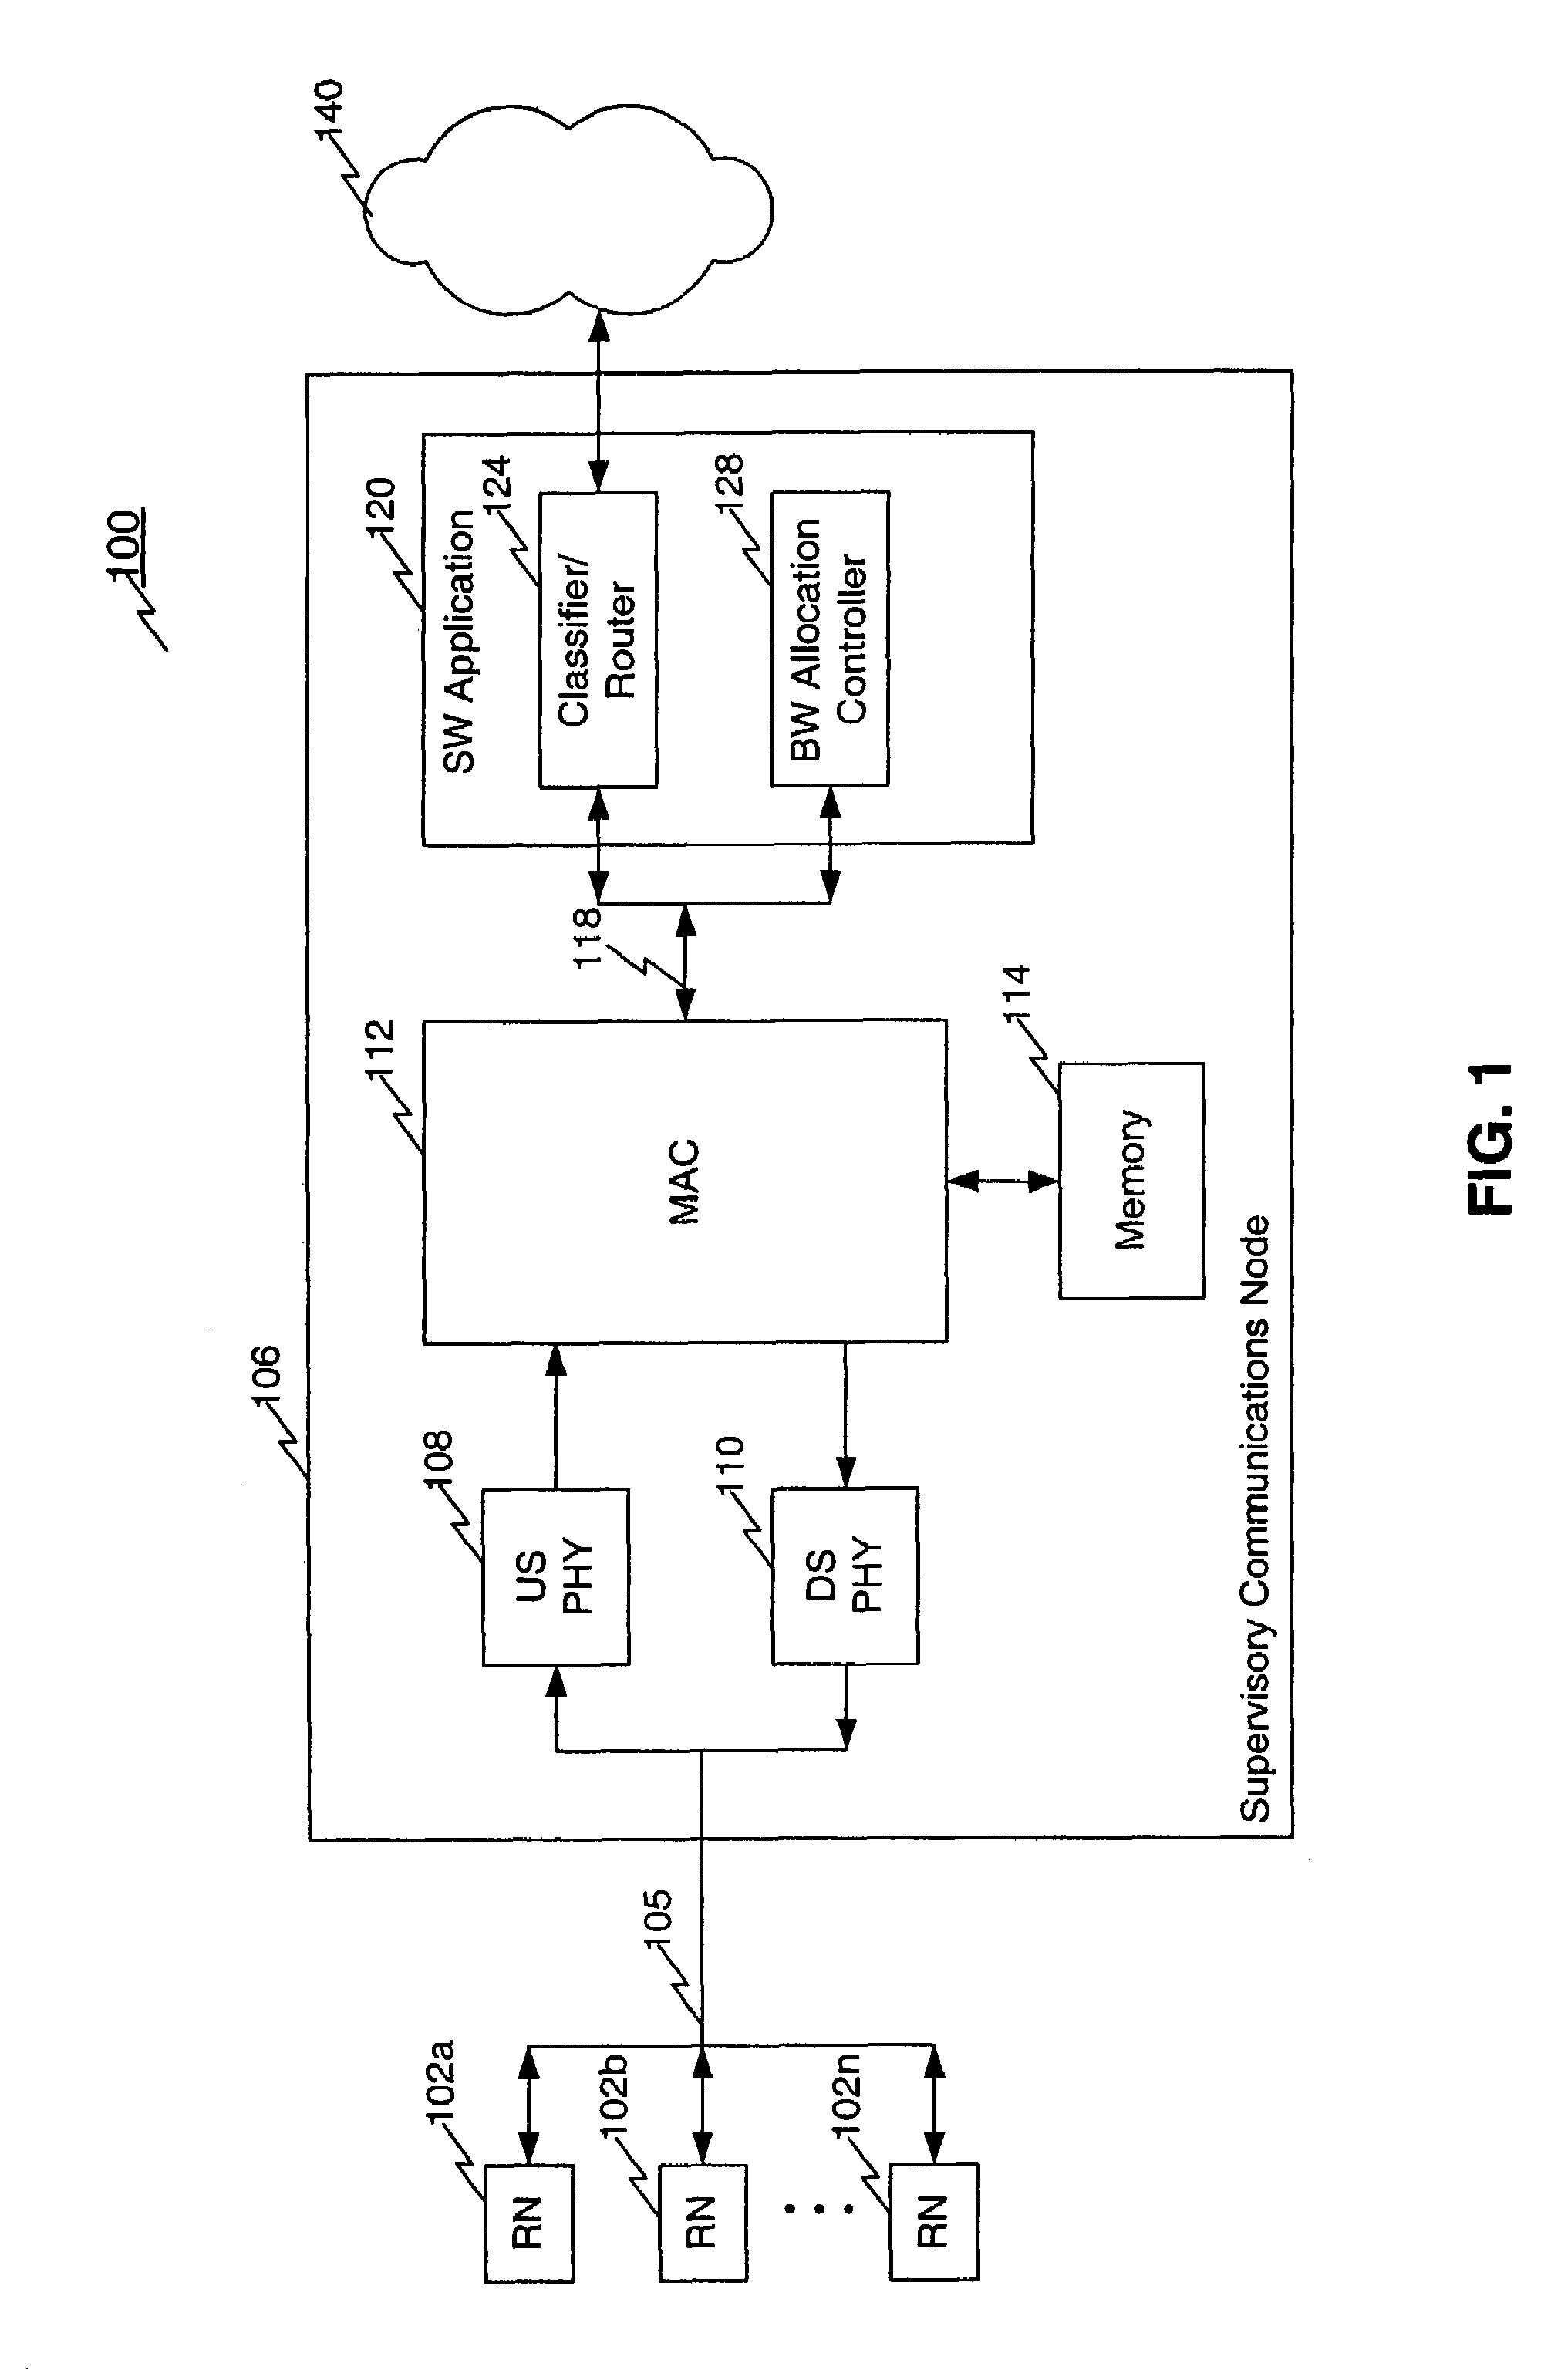 Method for synchronizing voice traffic with minimum latency in a wireless communications network